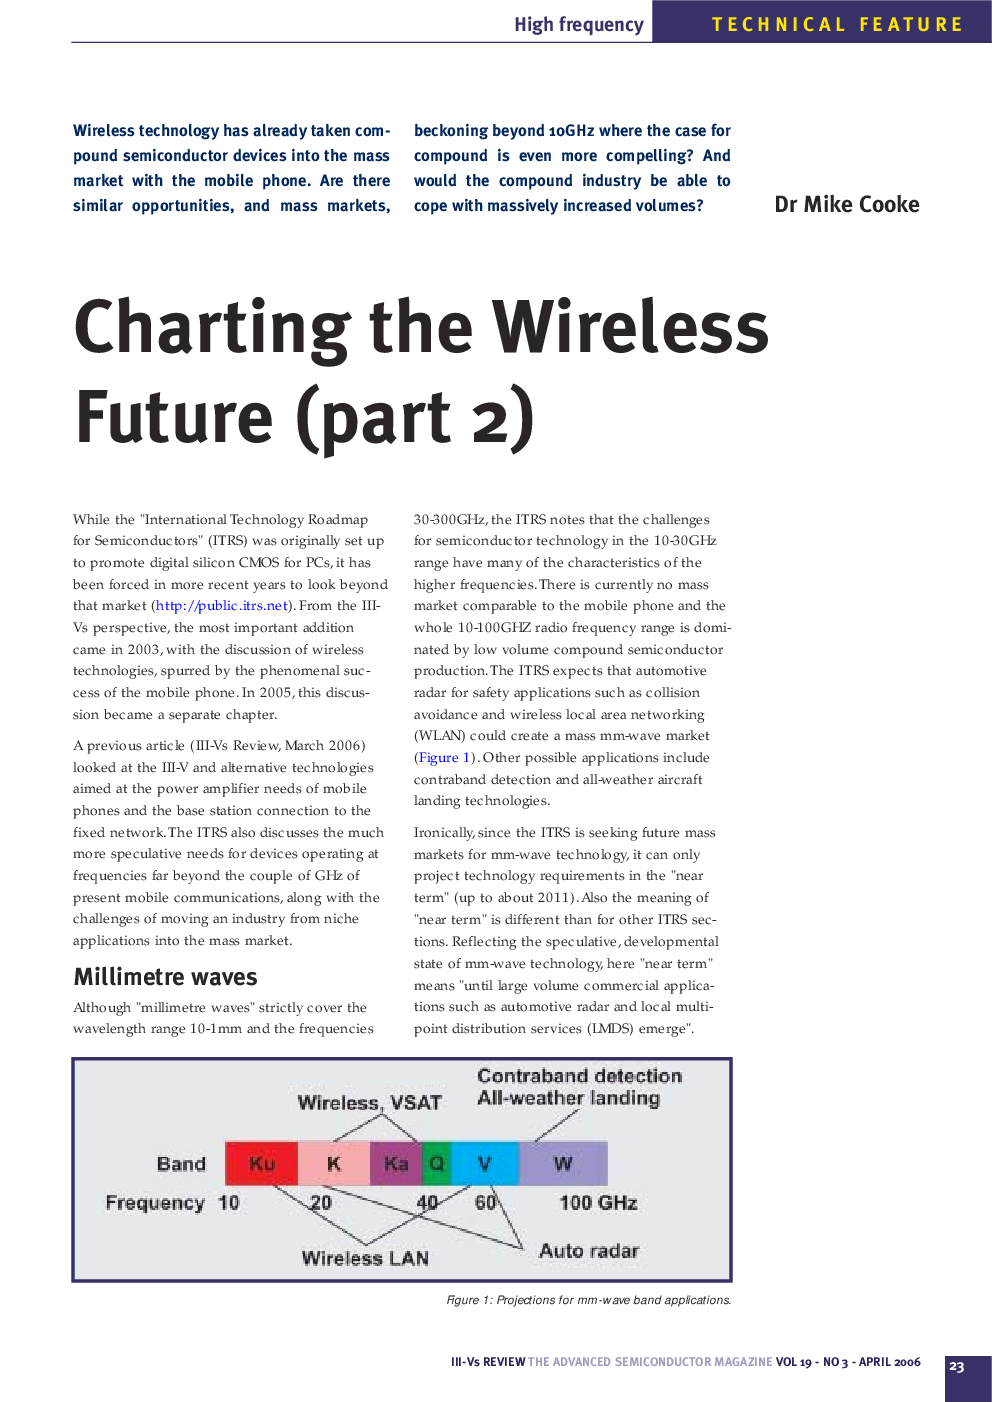 Charting the Wireless Future (part 2)